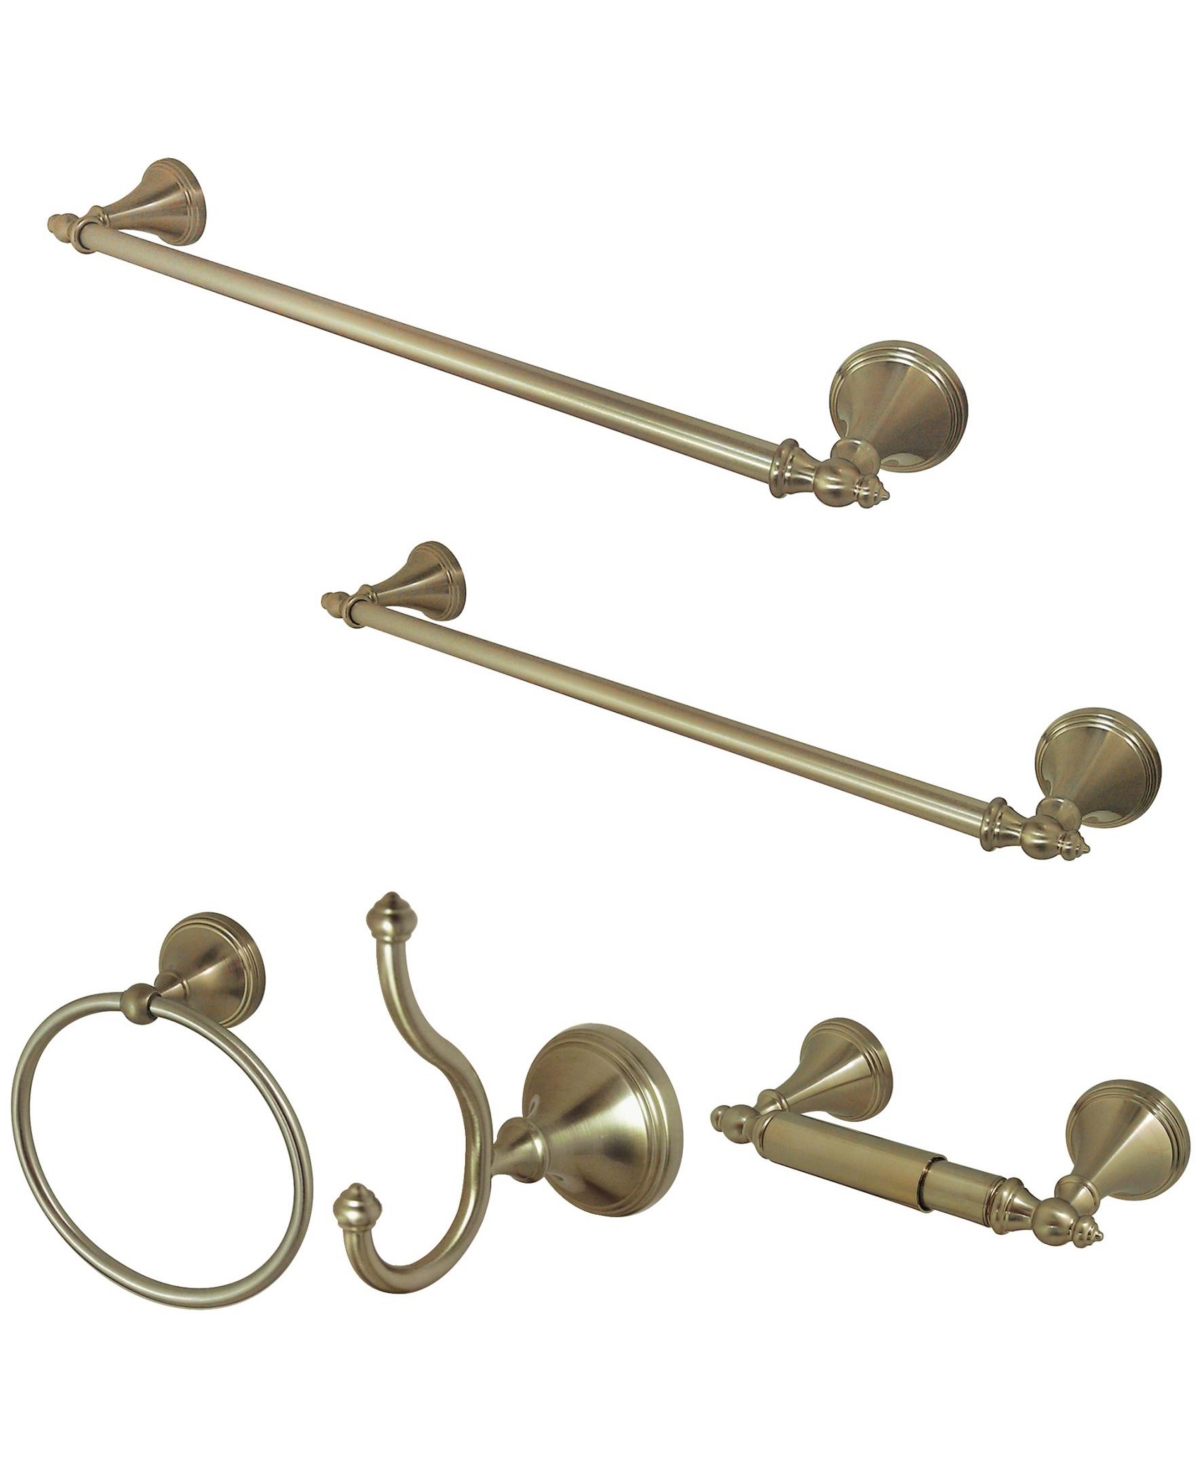 Kingston Brass Naples 18-Inch and 24-Inch Towel Bar Bathroom Accessory Set Bedding